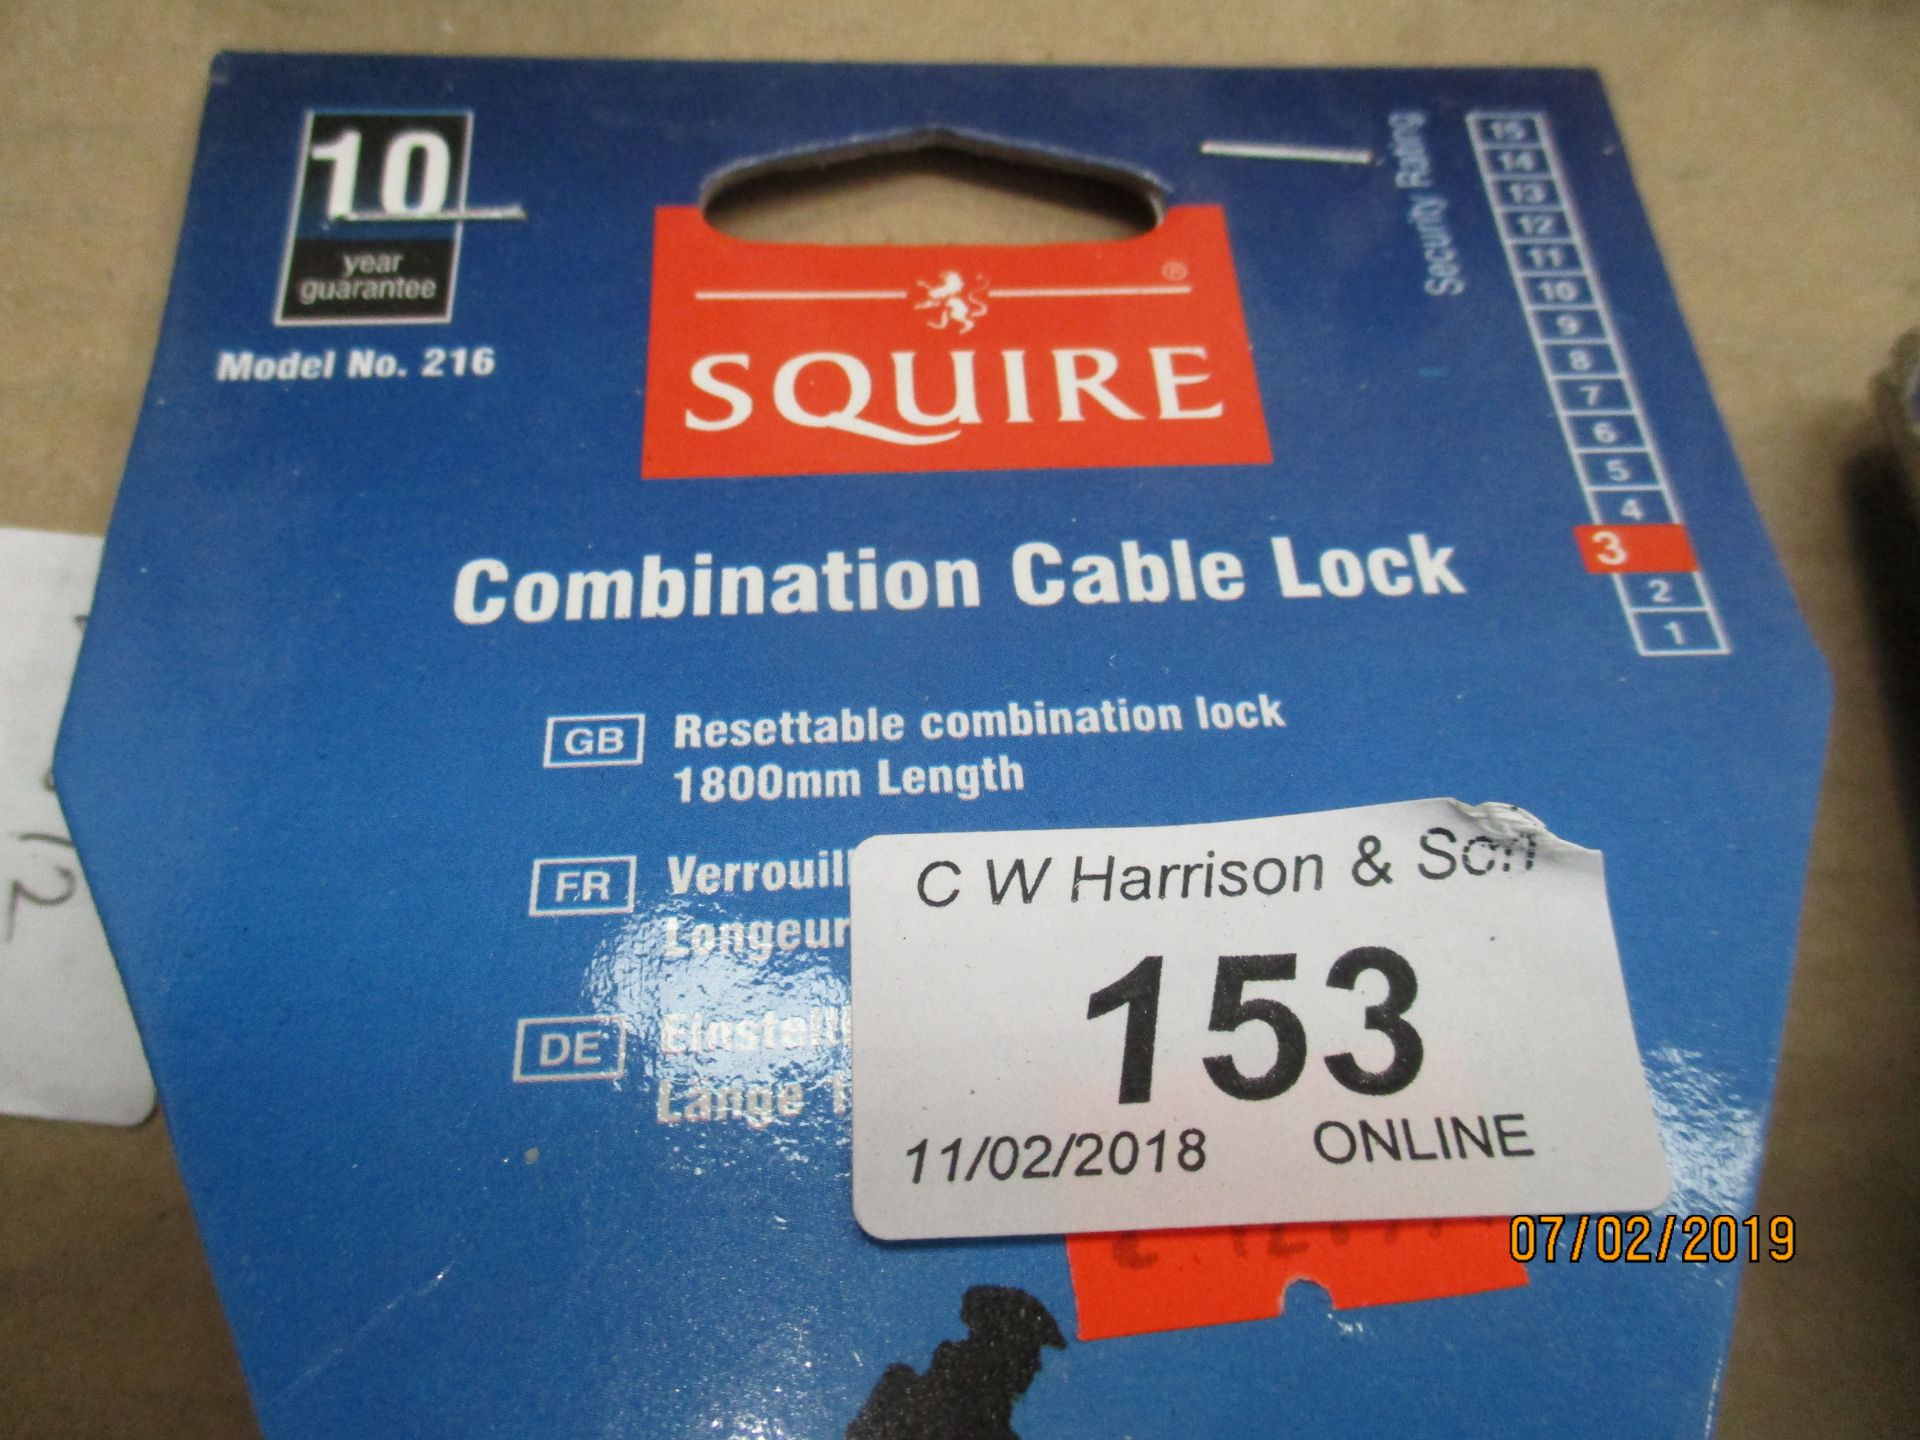 A Squire combination cable lock 1800mm